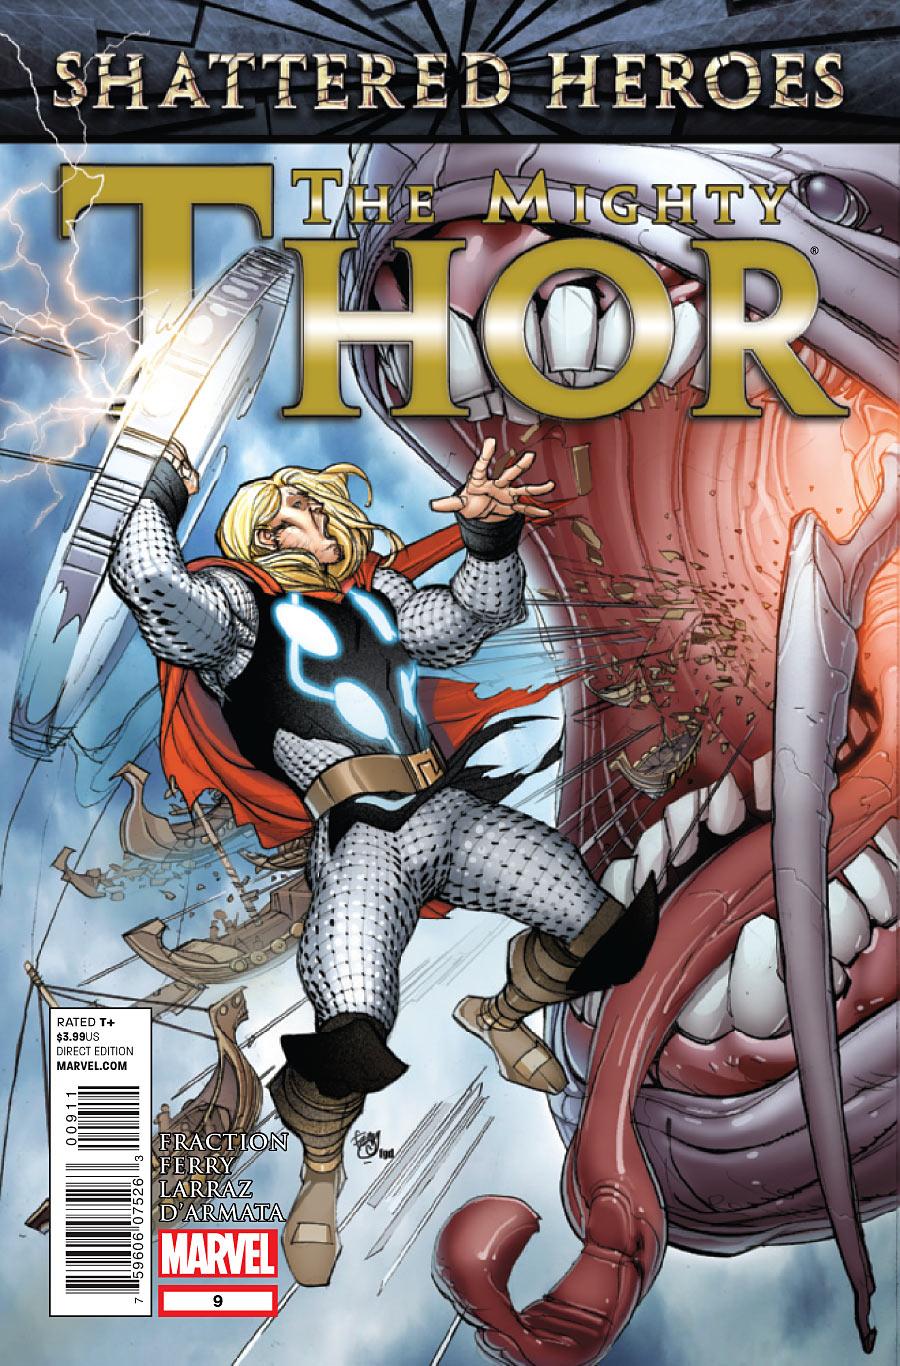 The Mighty Thor Vol. 1 #9